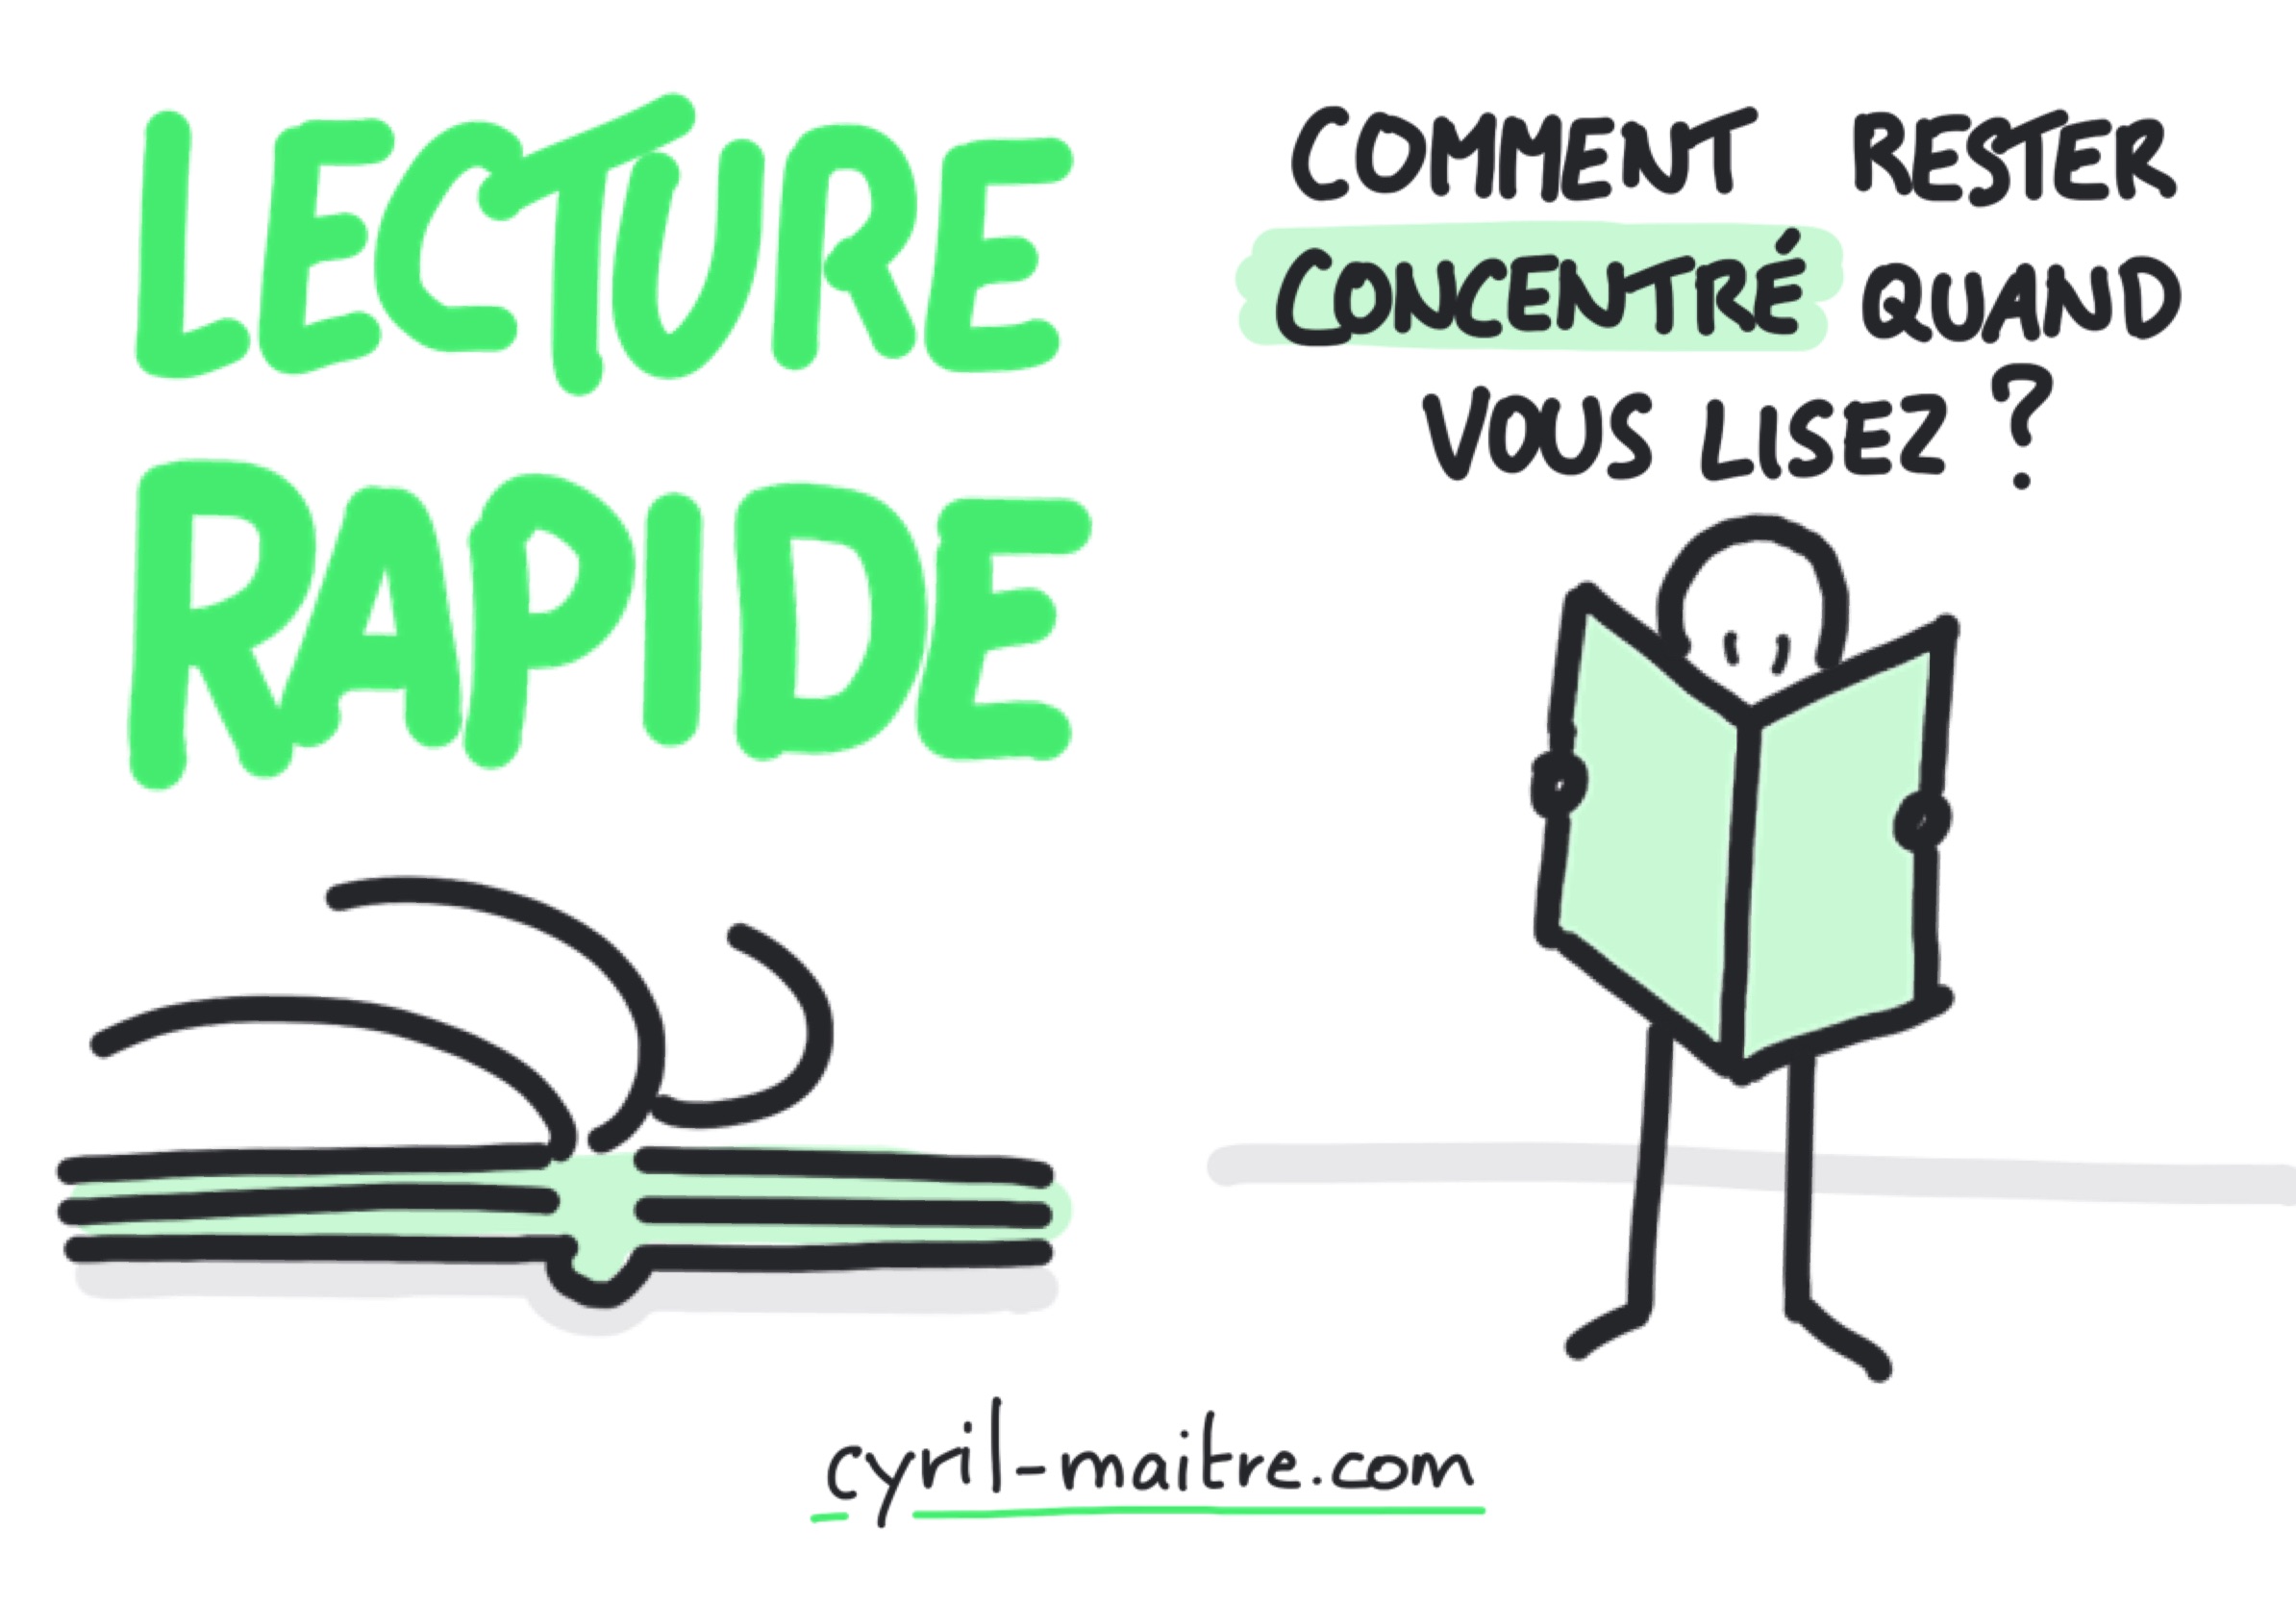 Lecture efficace